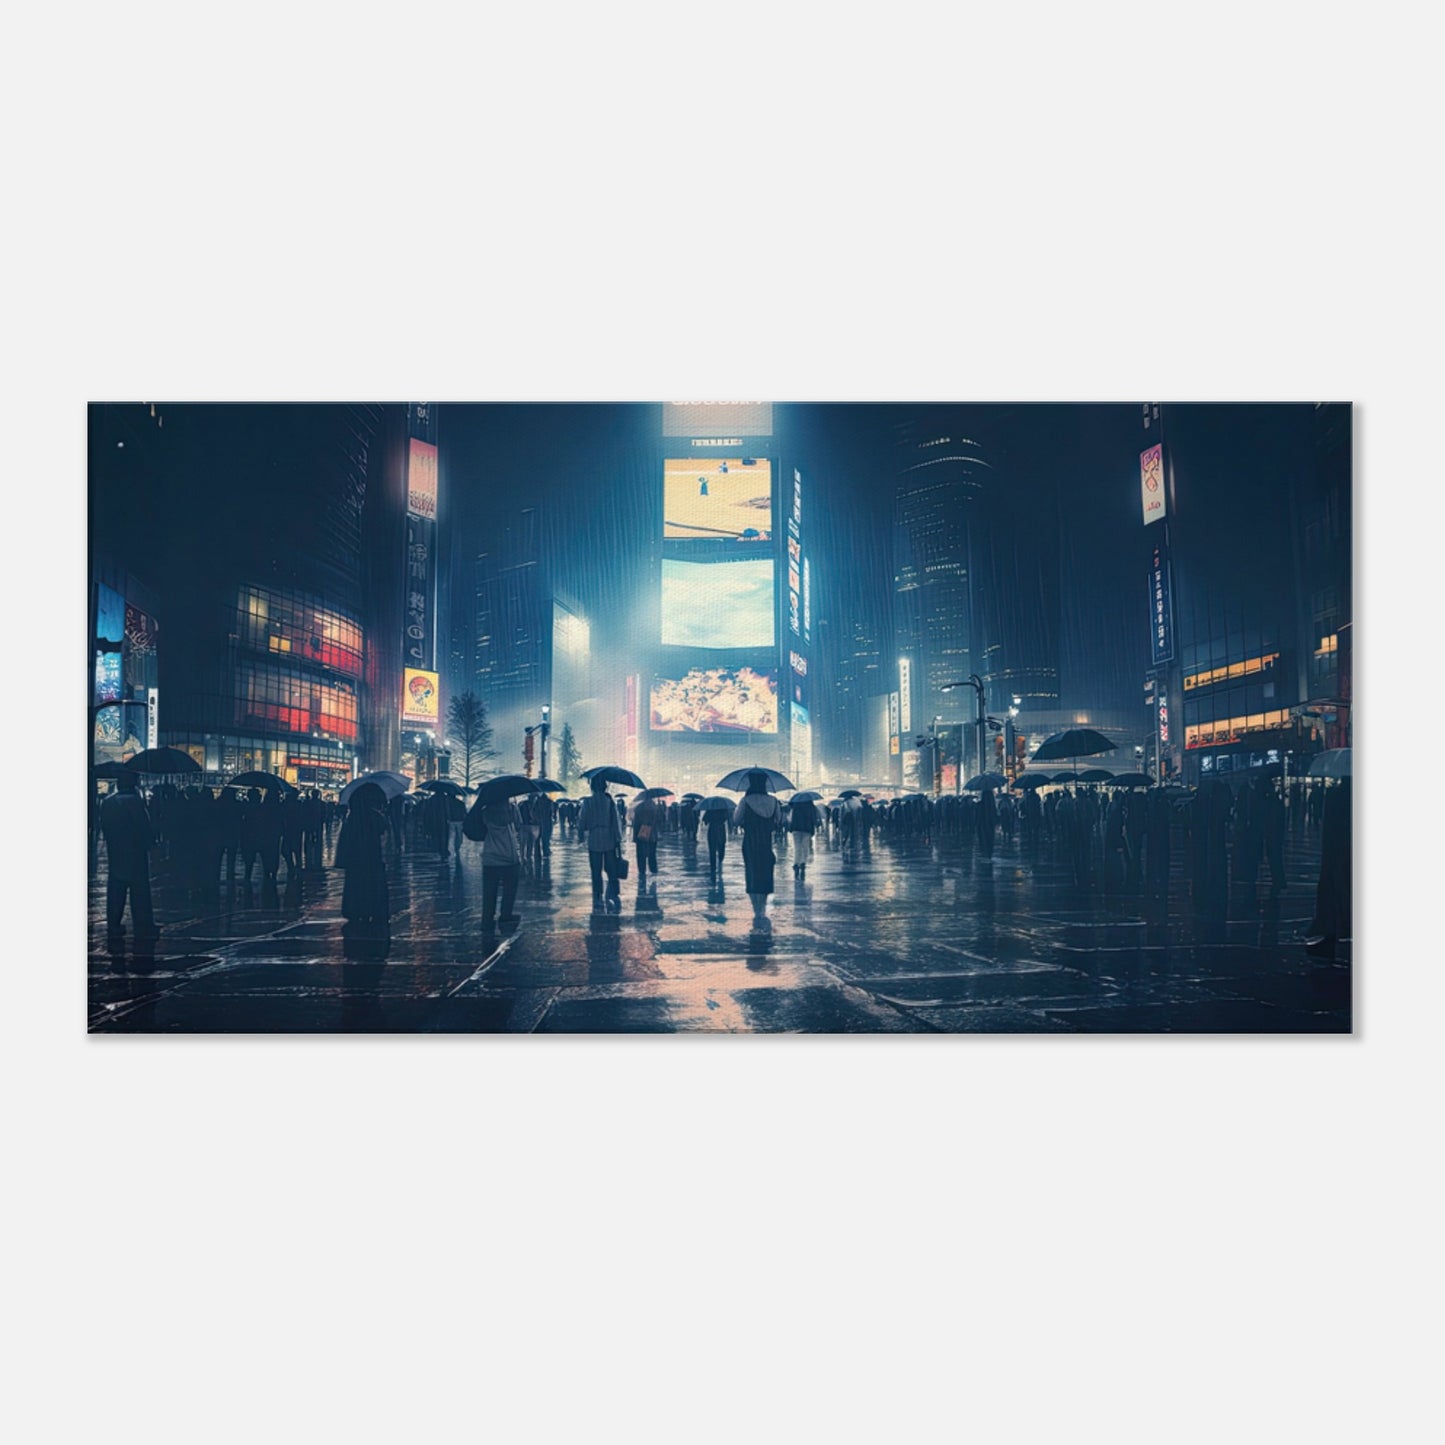 Shibuya Crossing in the Ran Artwork AllStyleArt Thick 50x100 cm / 20x40" 